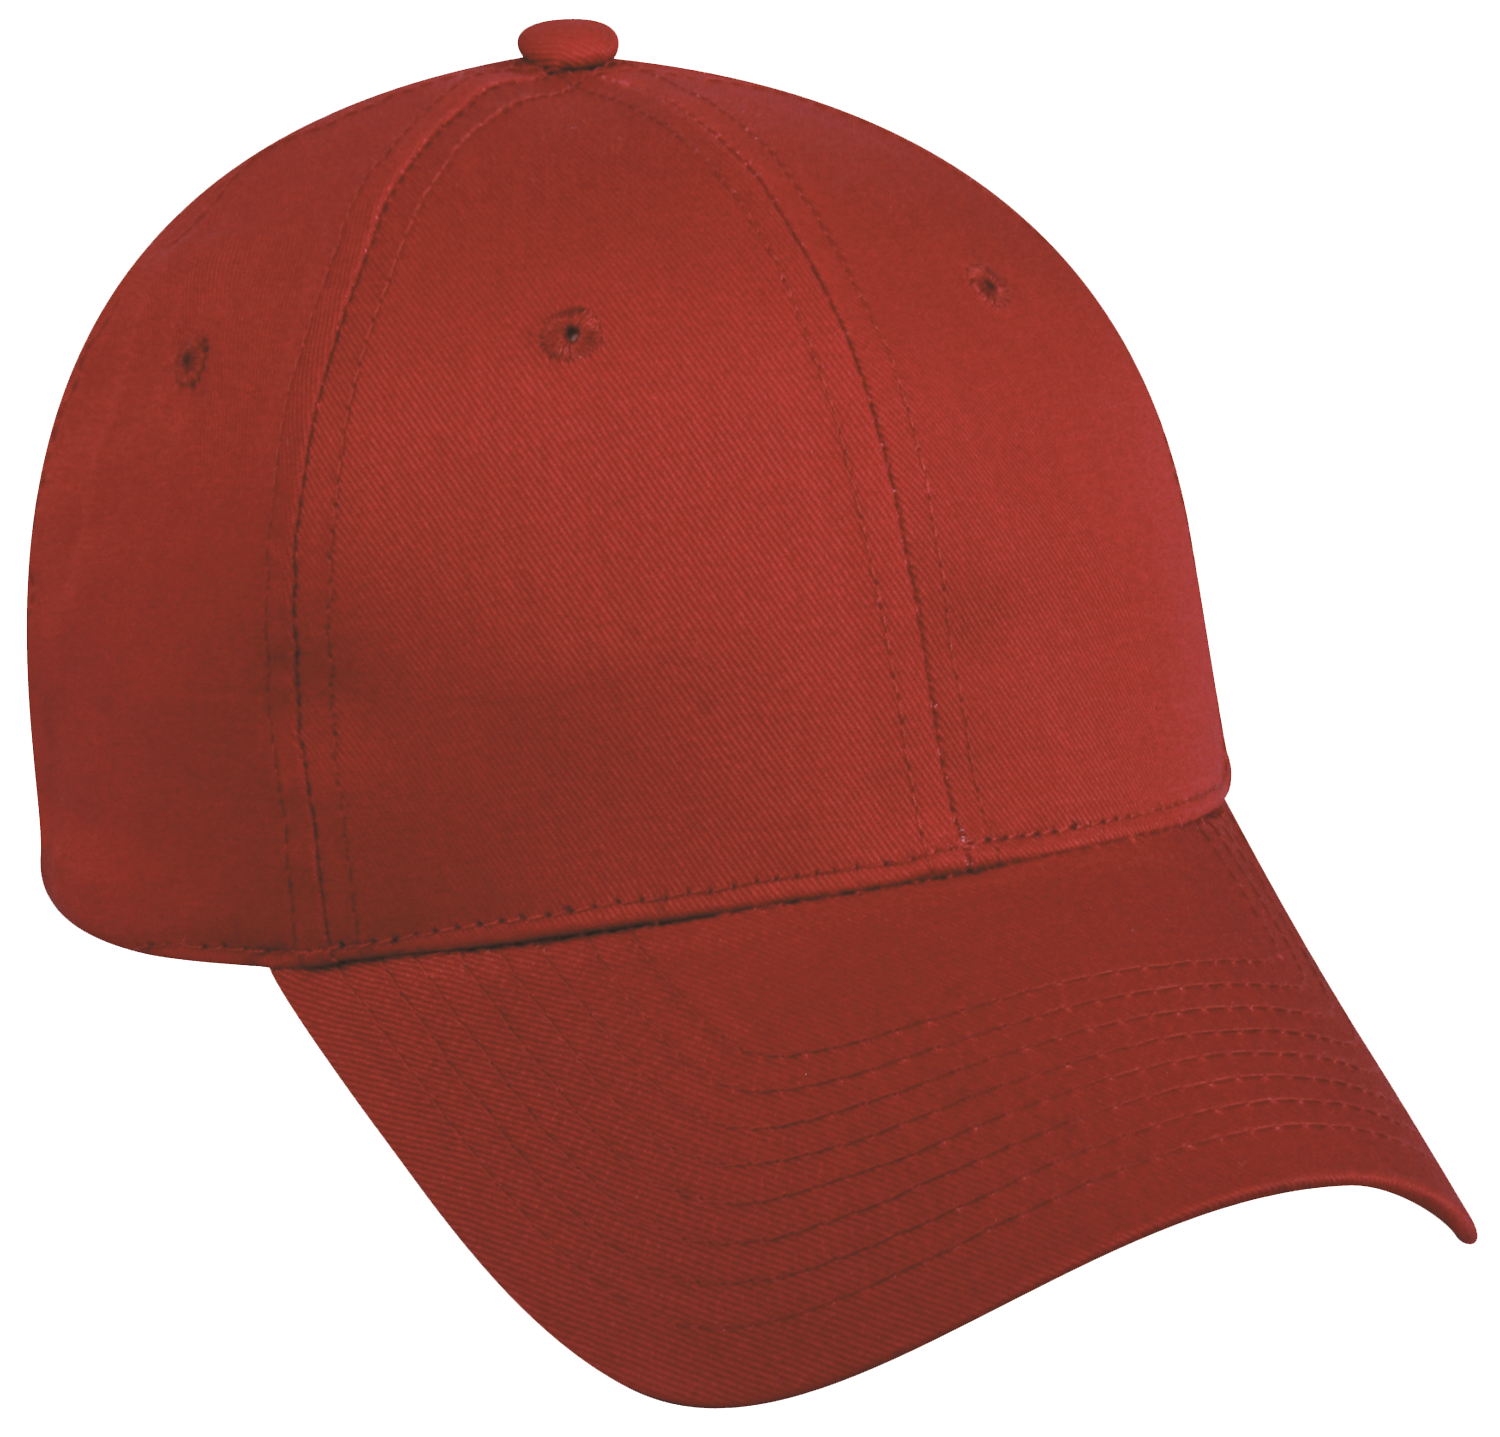 Baseball Red Cap PNG Background